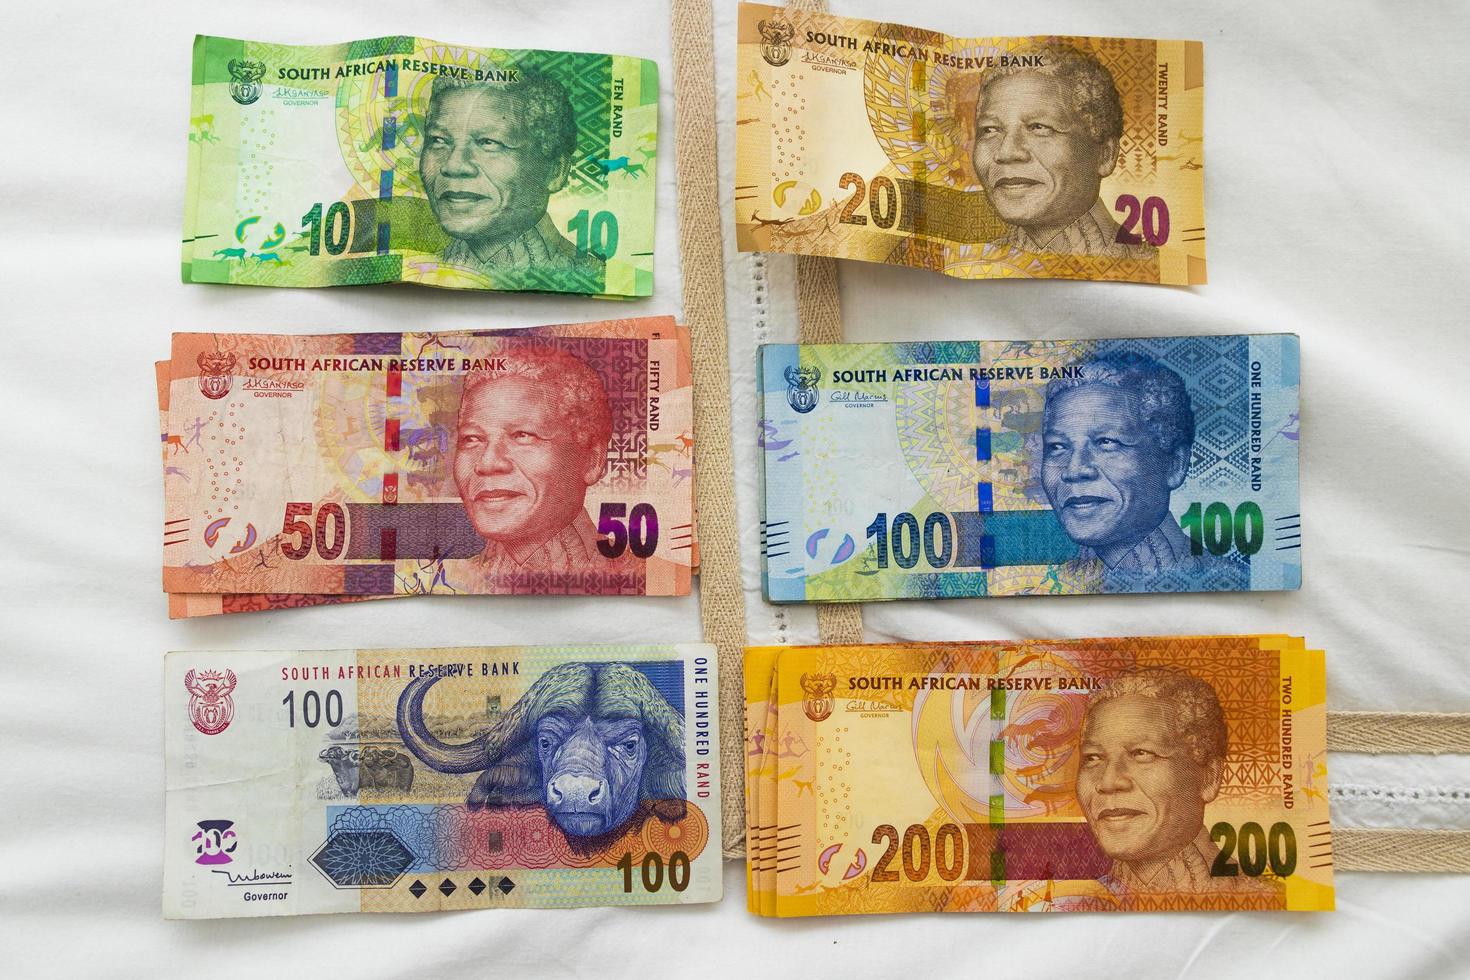 Cape Town Western Cape South Africa 2018 South African colorful banknotes money with Nelson Mandela. photo